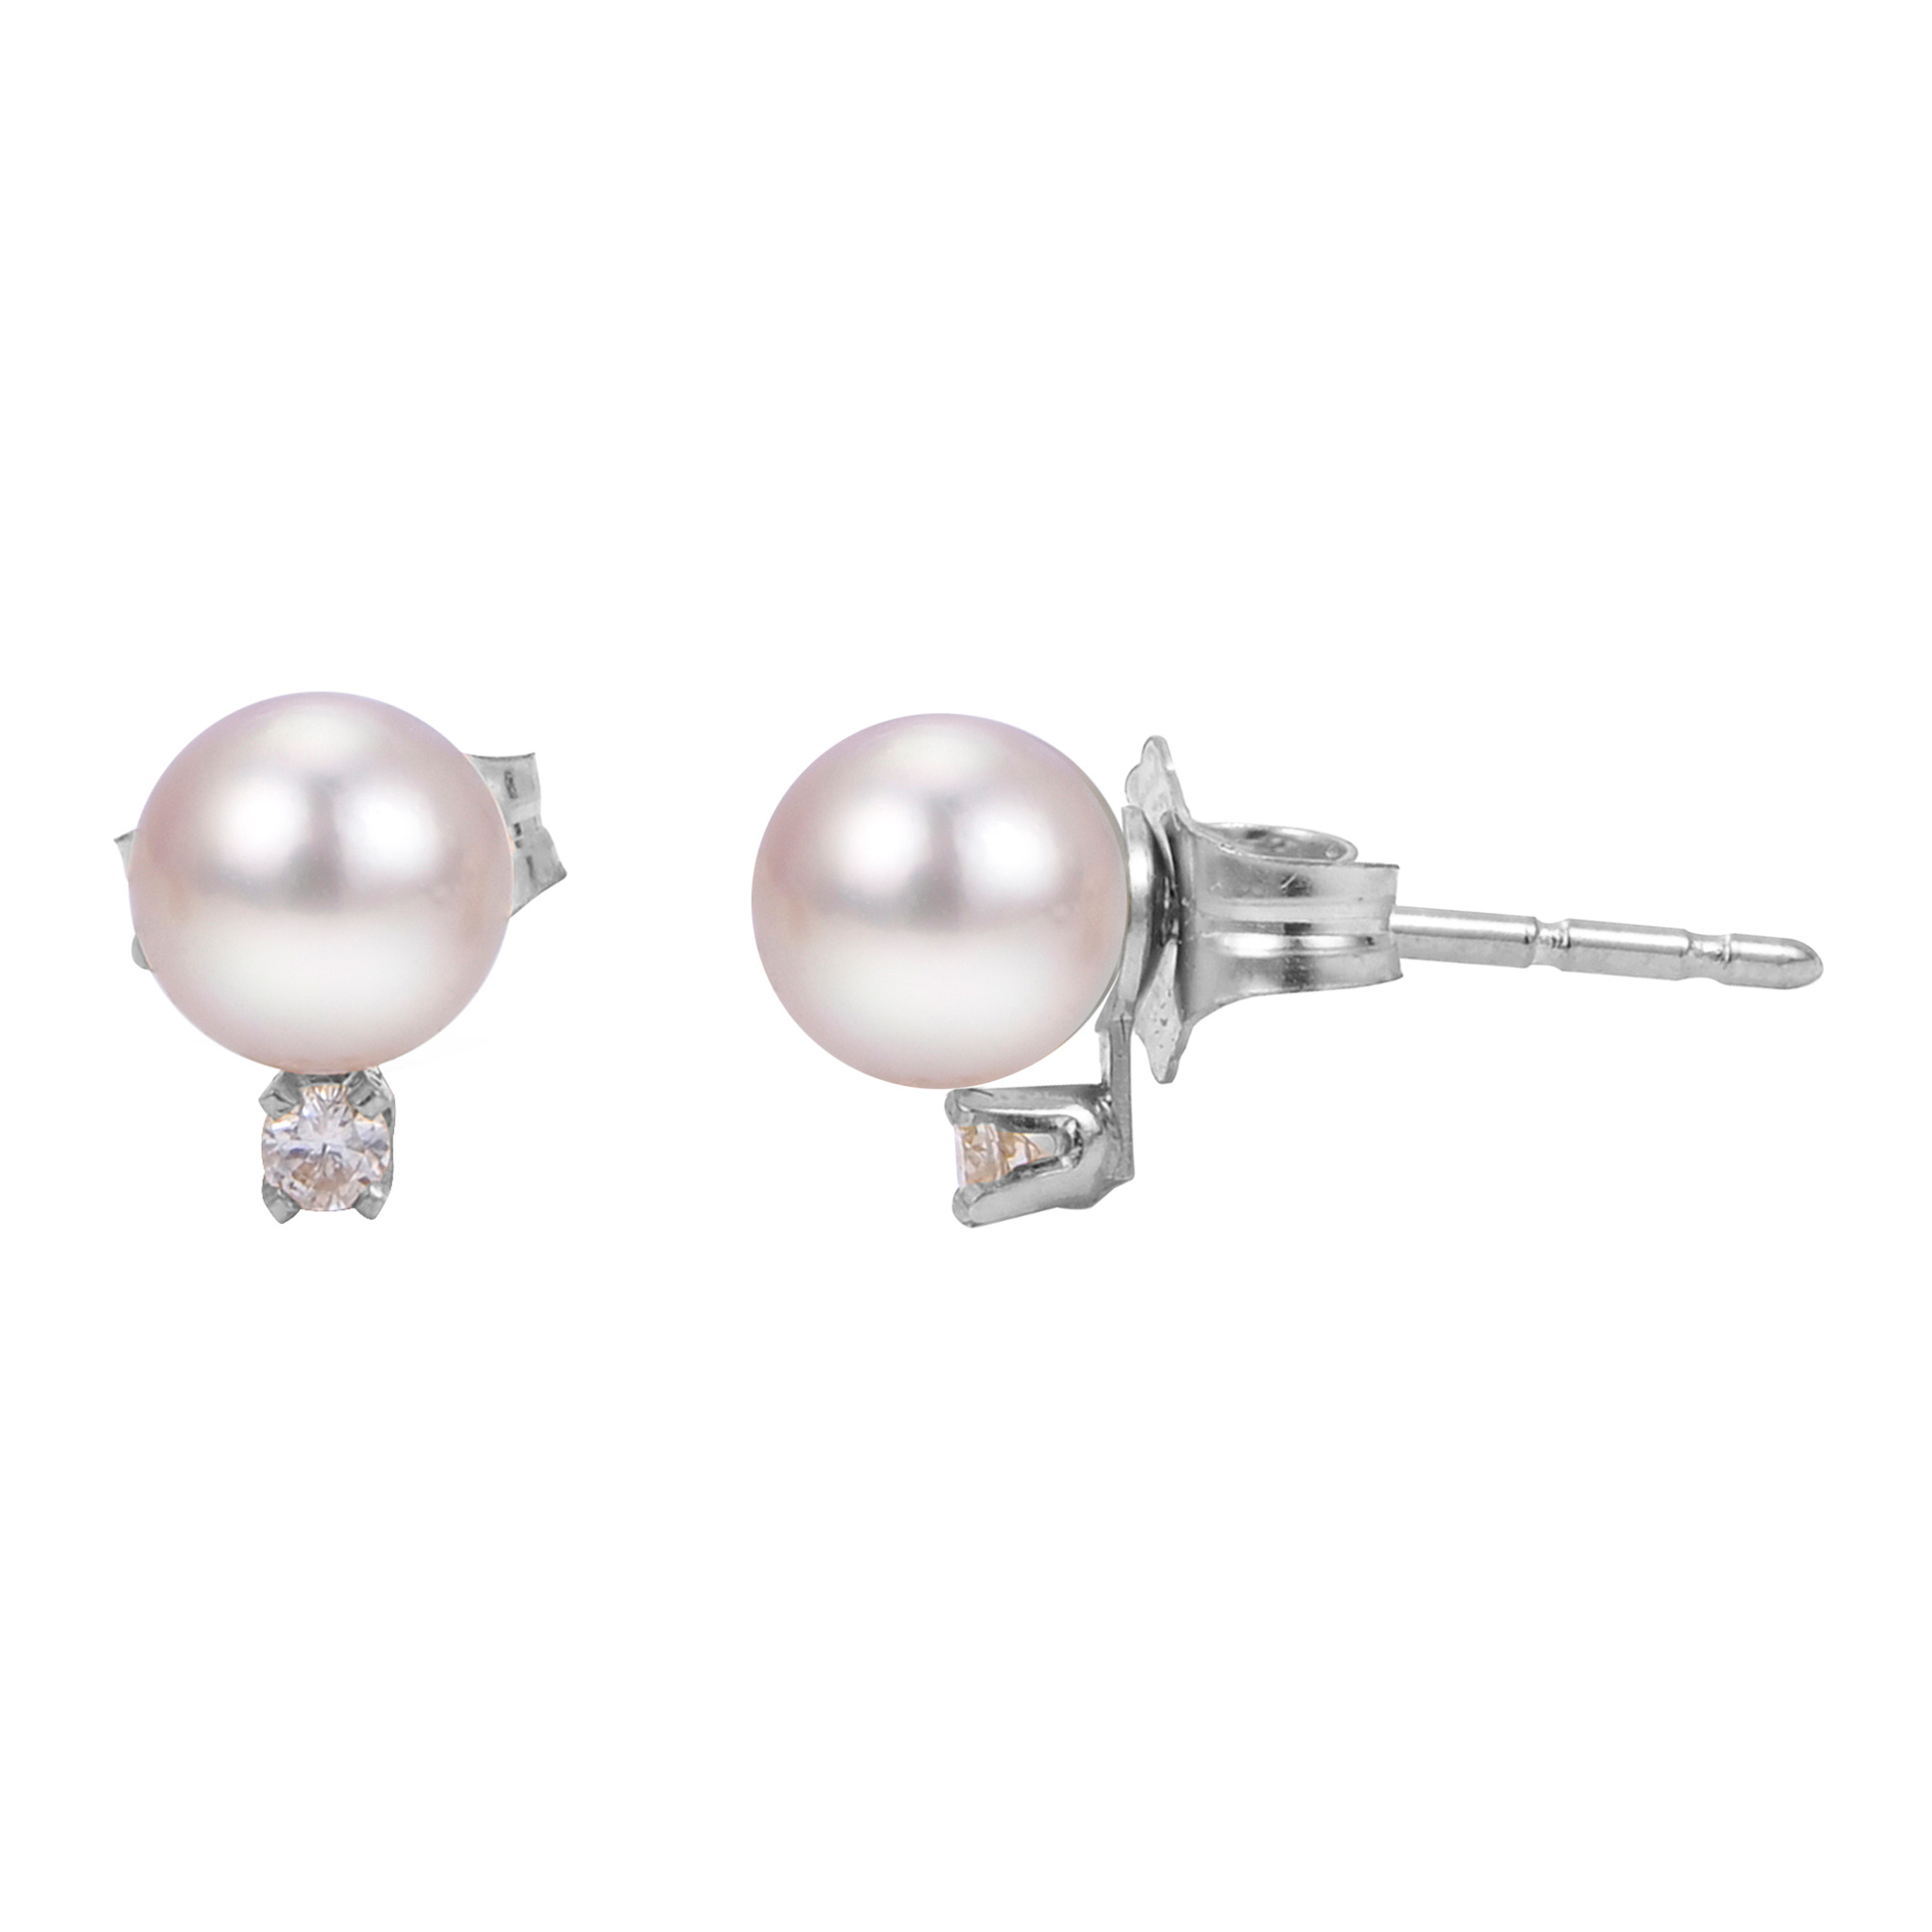 5-5.5mm Akoya Cultured Pearl and Diamond Stud Earrings, White Gold 1/20ctw